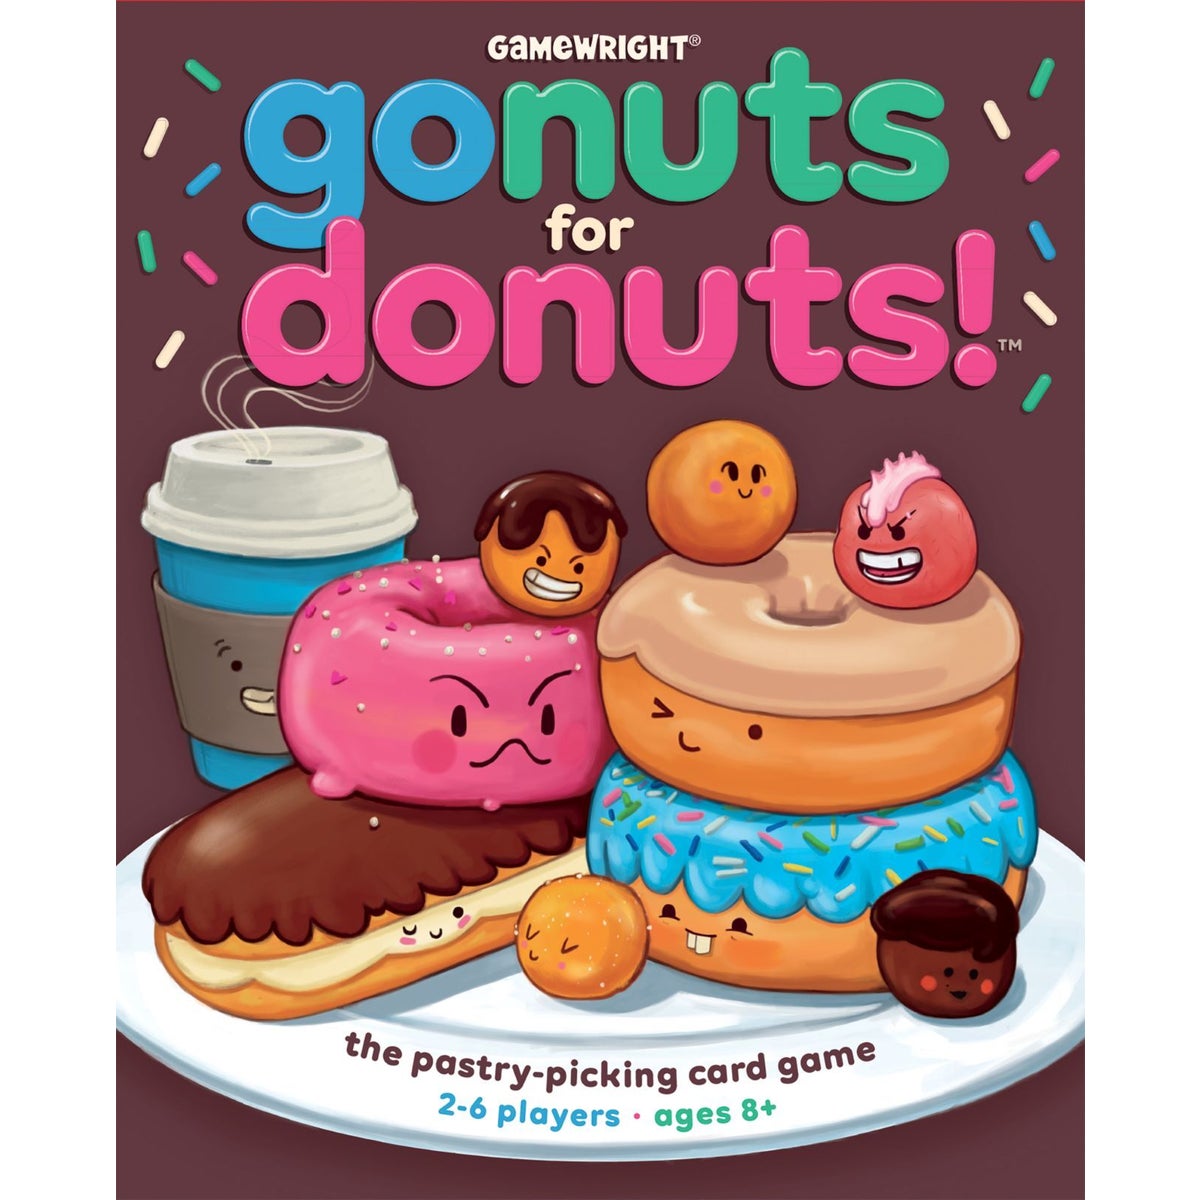 GONUTS FOR DONUTS (6) ENG